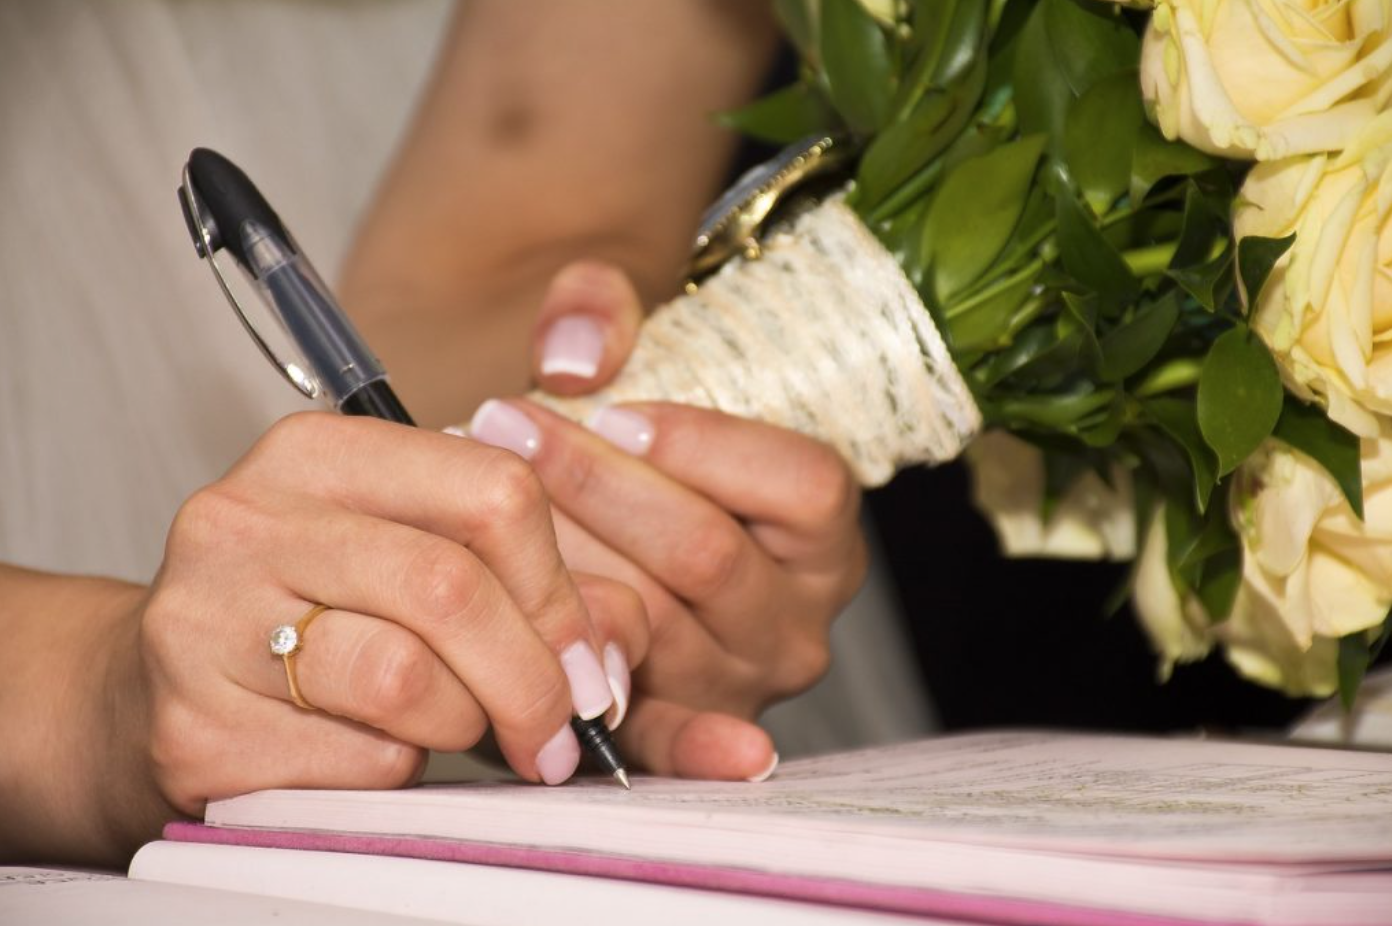 Woman signing paper while holding bouquet; image by epicioci, via Pixabay.com.